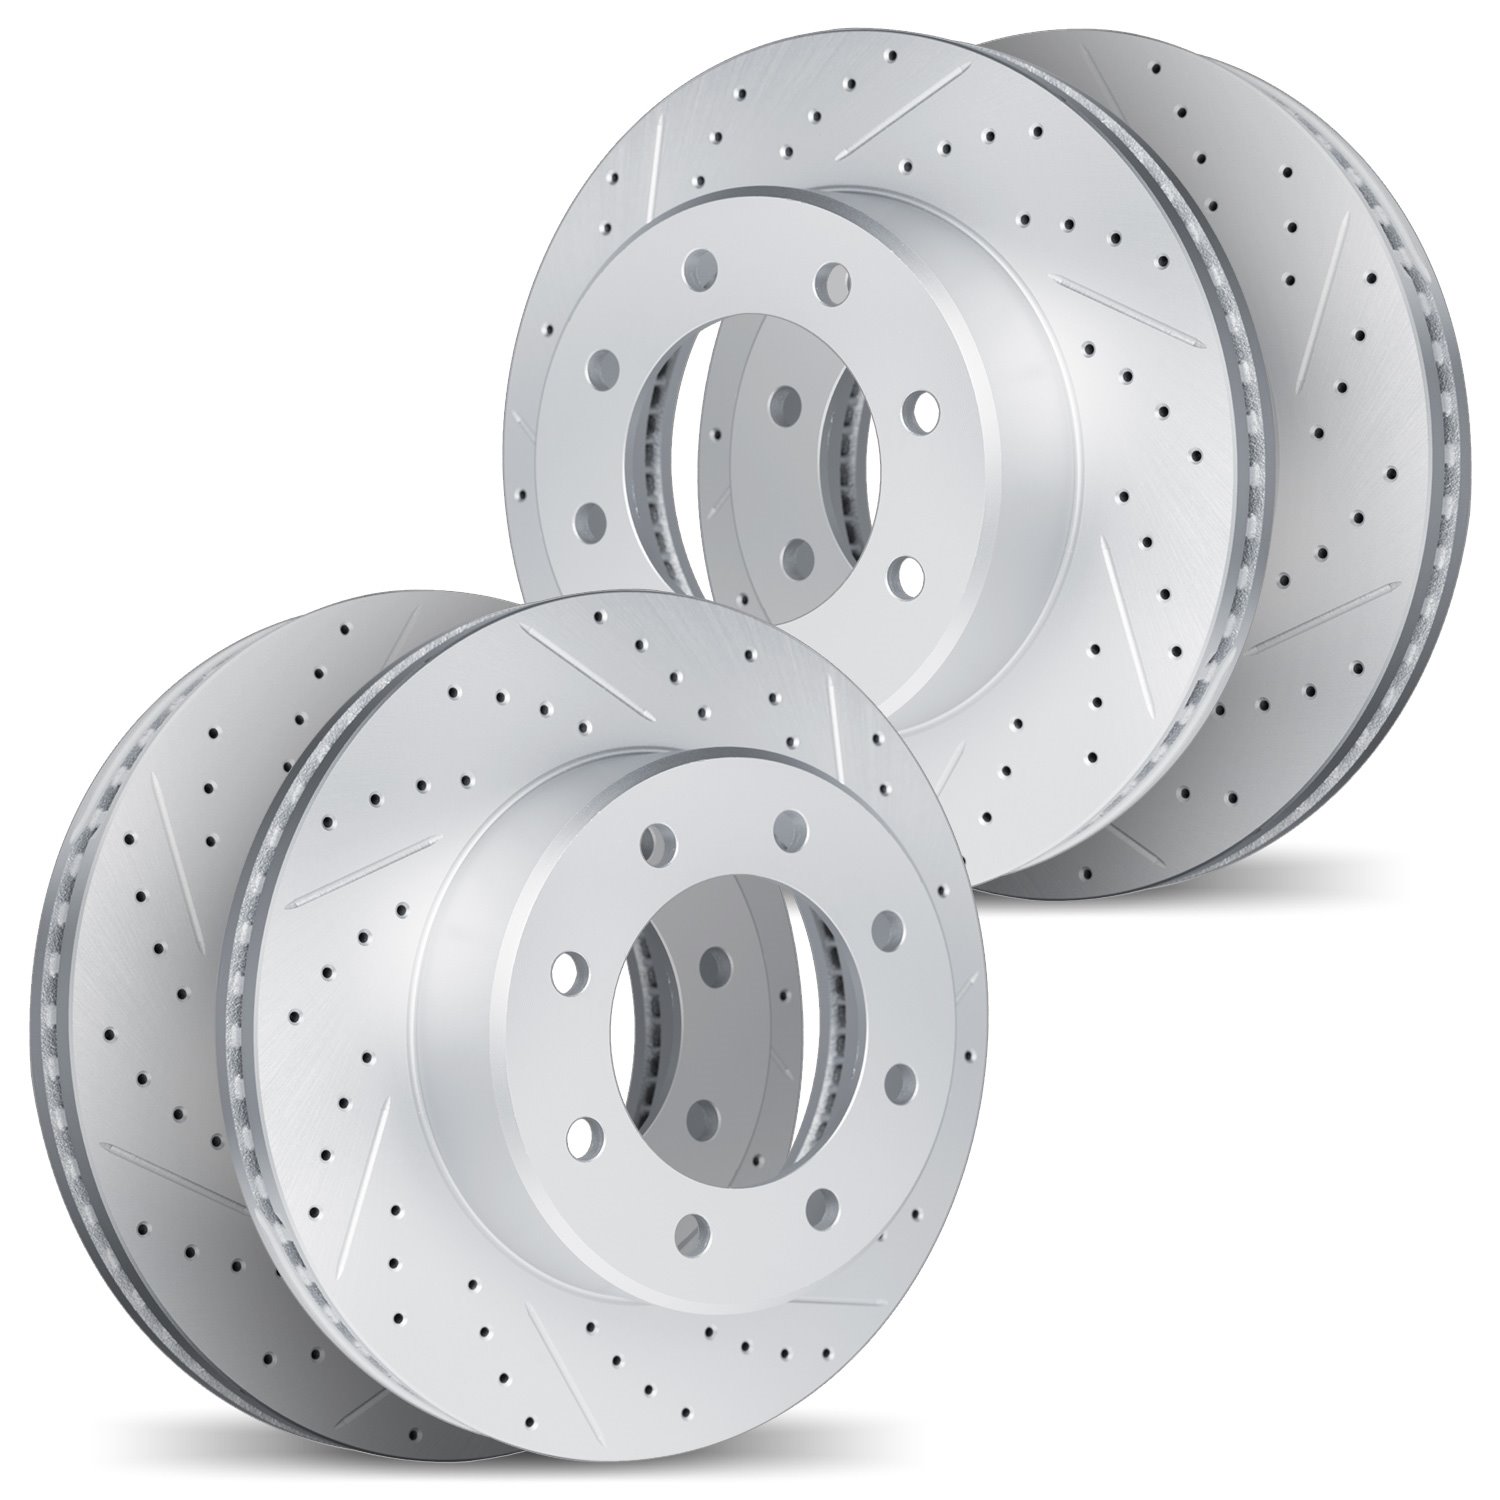 2004-54108 Geoperformance Drilled/Slotted Brake Rotors, 2006-2012 Ford/Lincoln/Mercury/Mazda, Position: Front and Rear